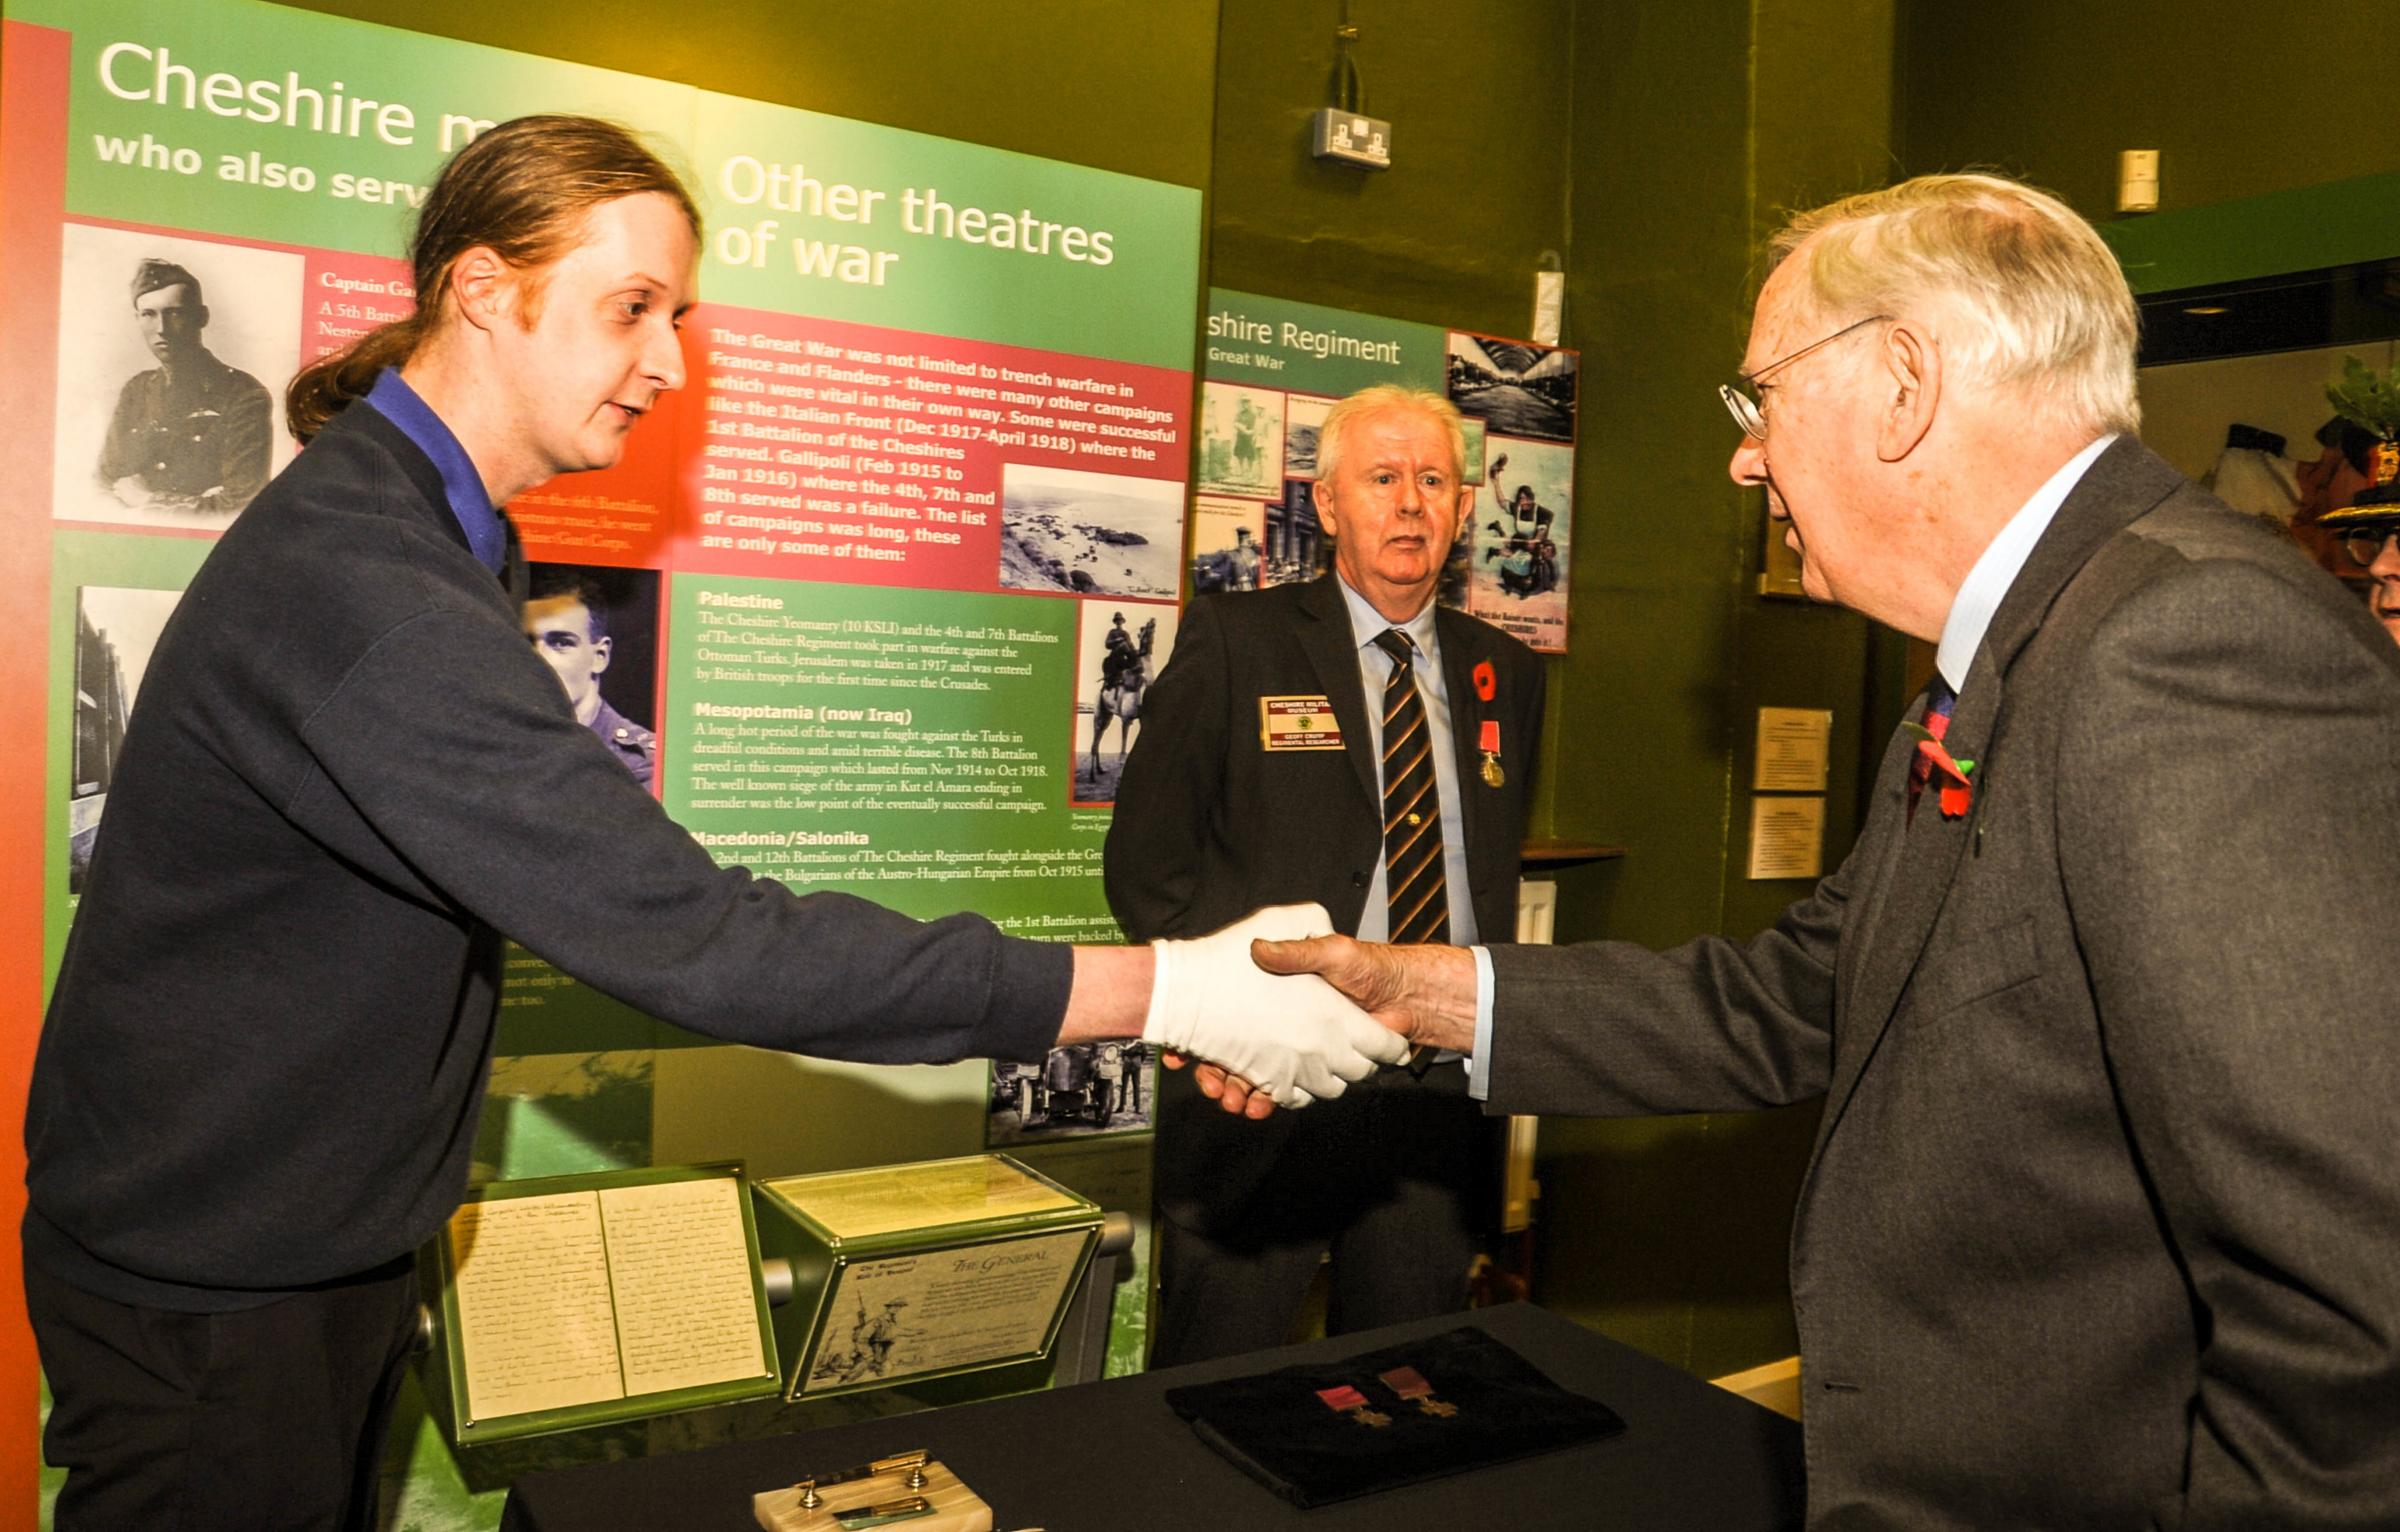 Museum staff Alex Clark greets HRH The Duke of Gloucester to view the pen used by US General MacArthur to sign the Japanese Instrument of Surrender, marking the end of hostilities in WWII.